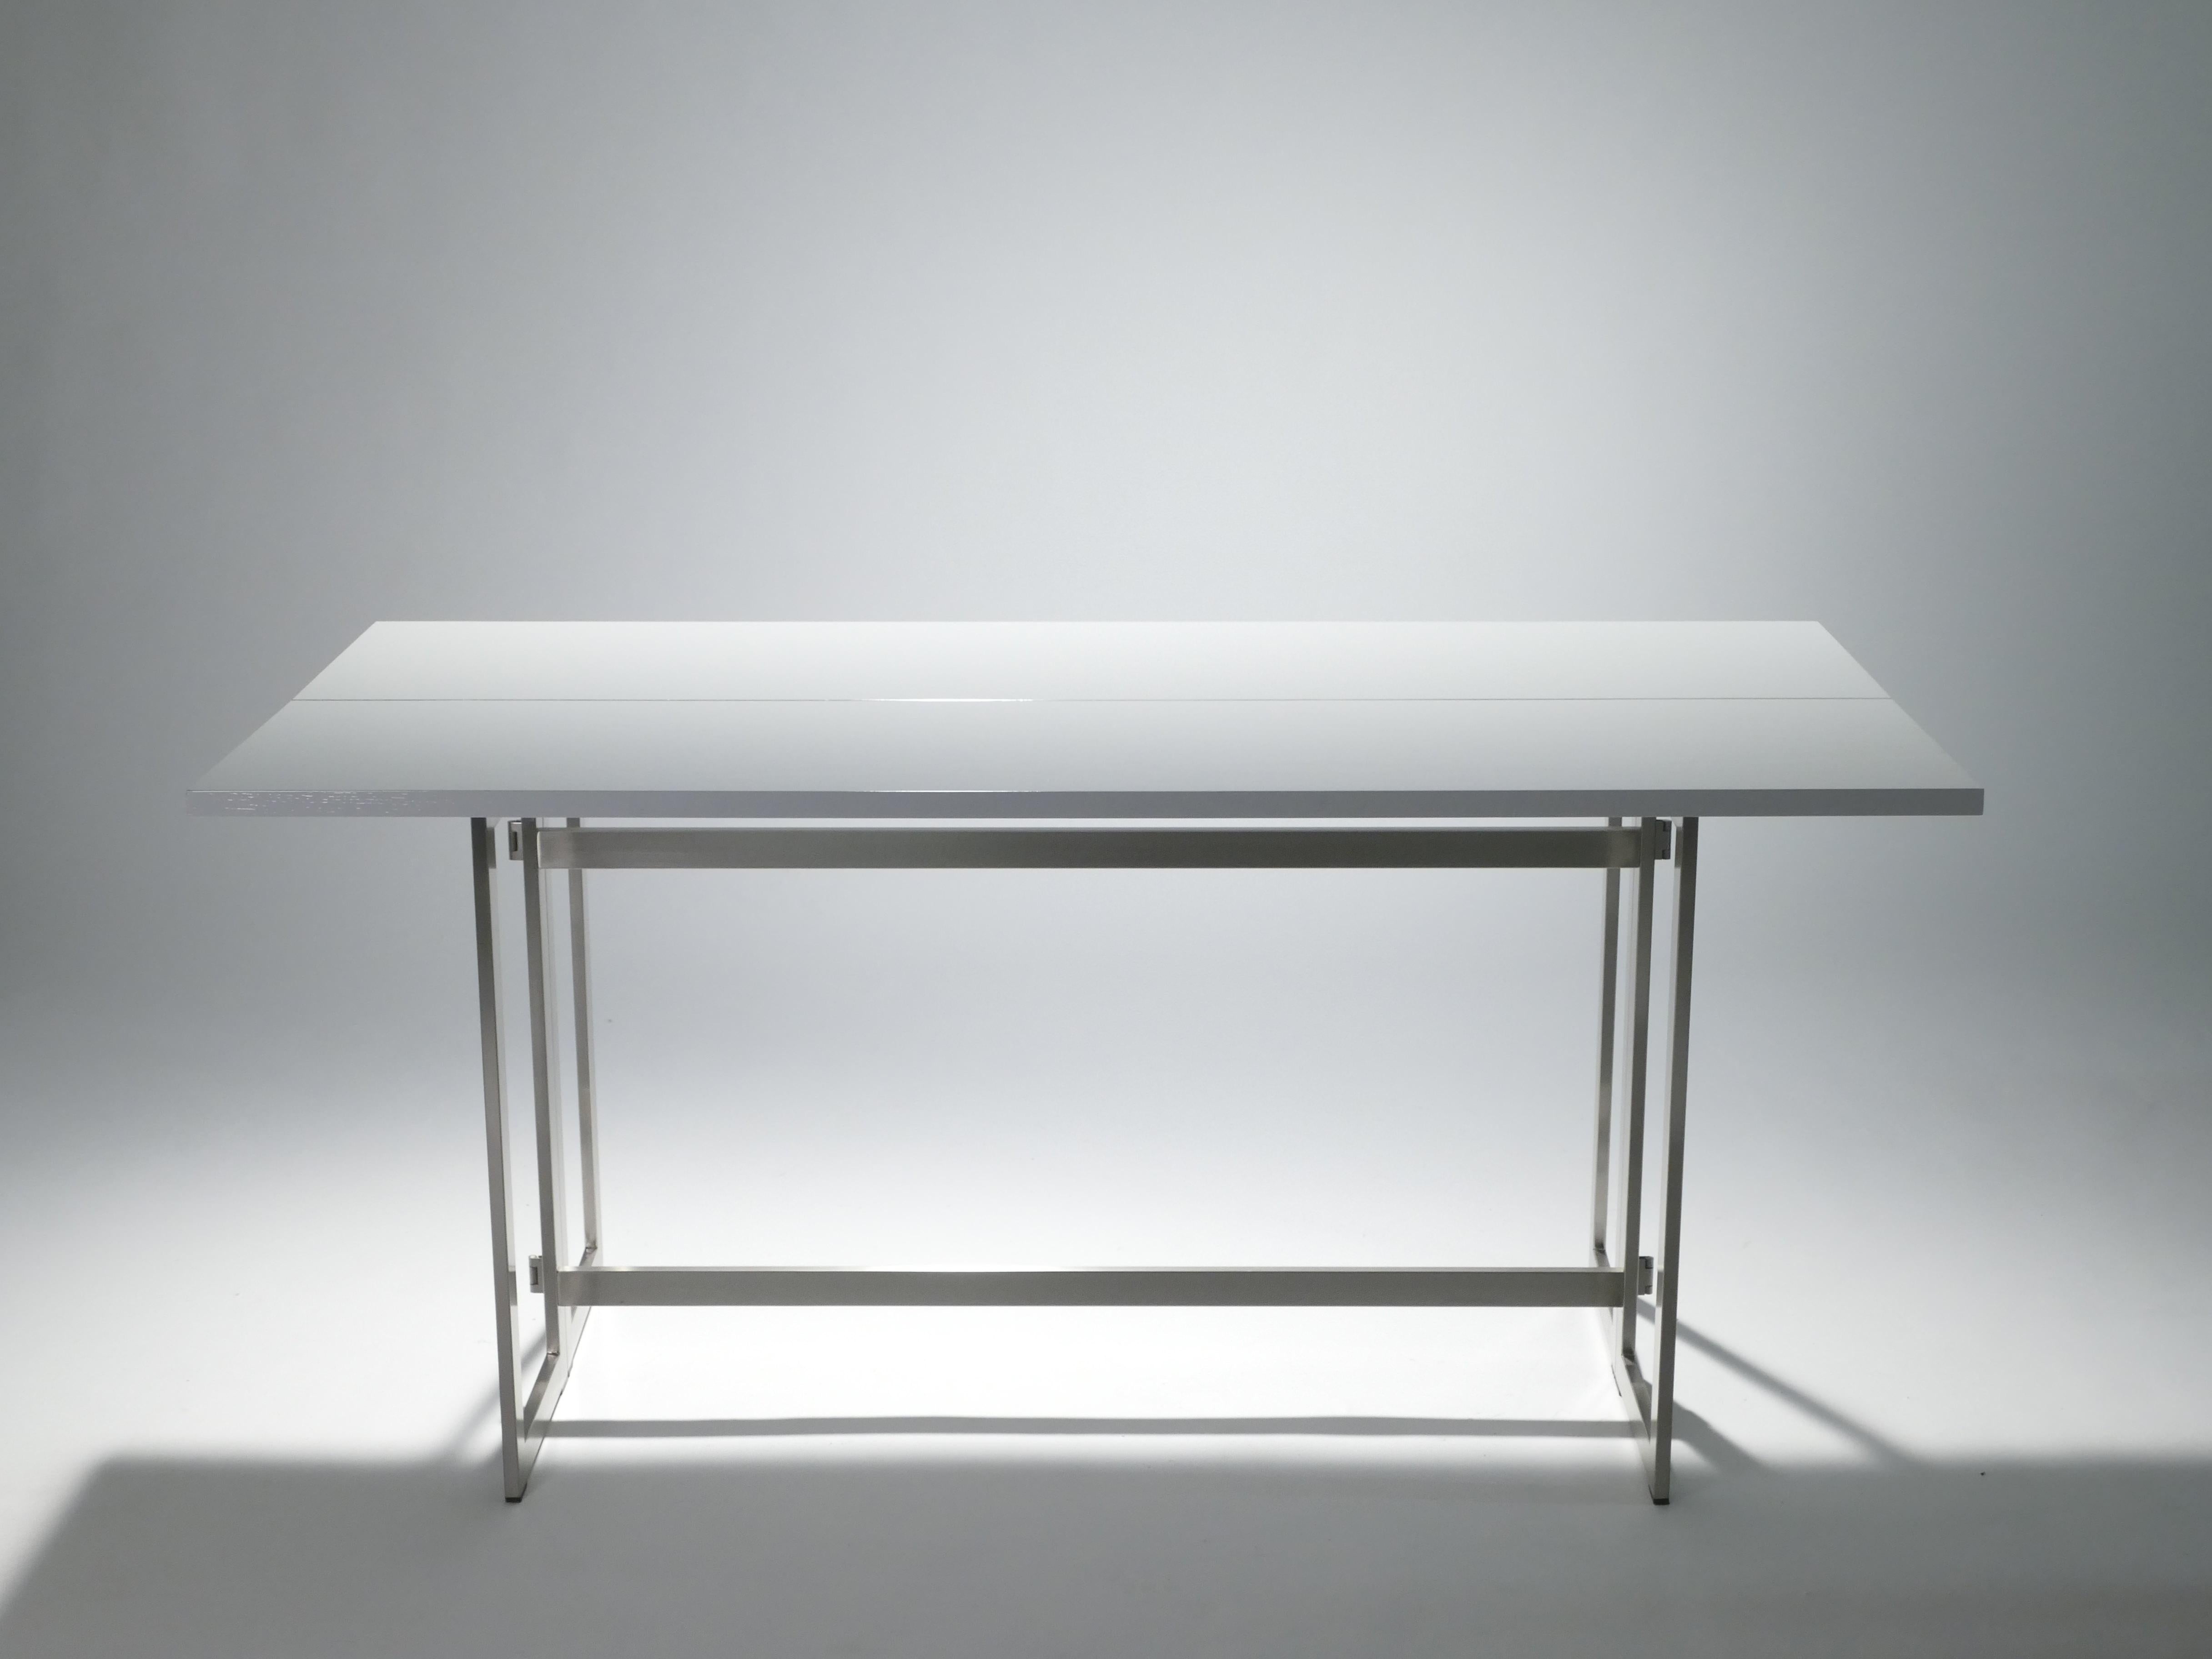 Italian Midcentury White Lacquer Extending Console Table, 1970s (Französisch)